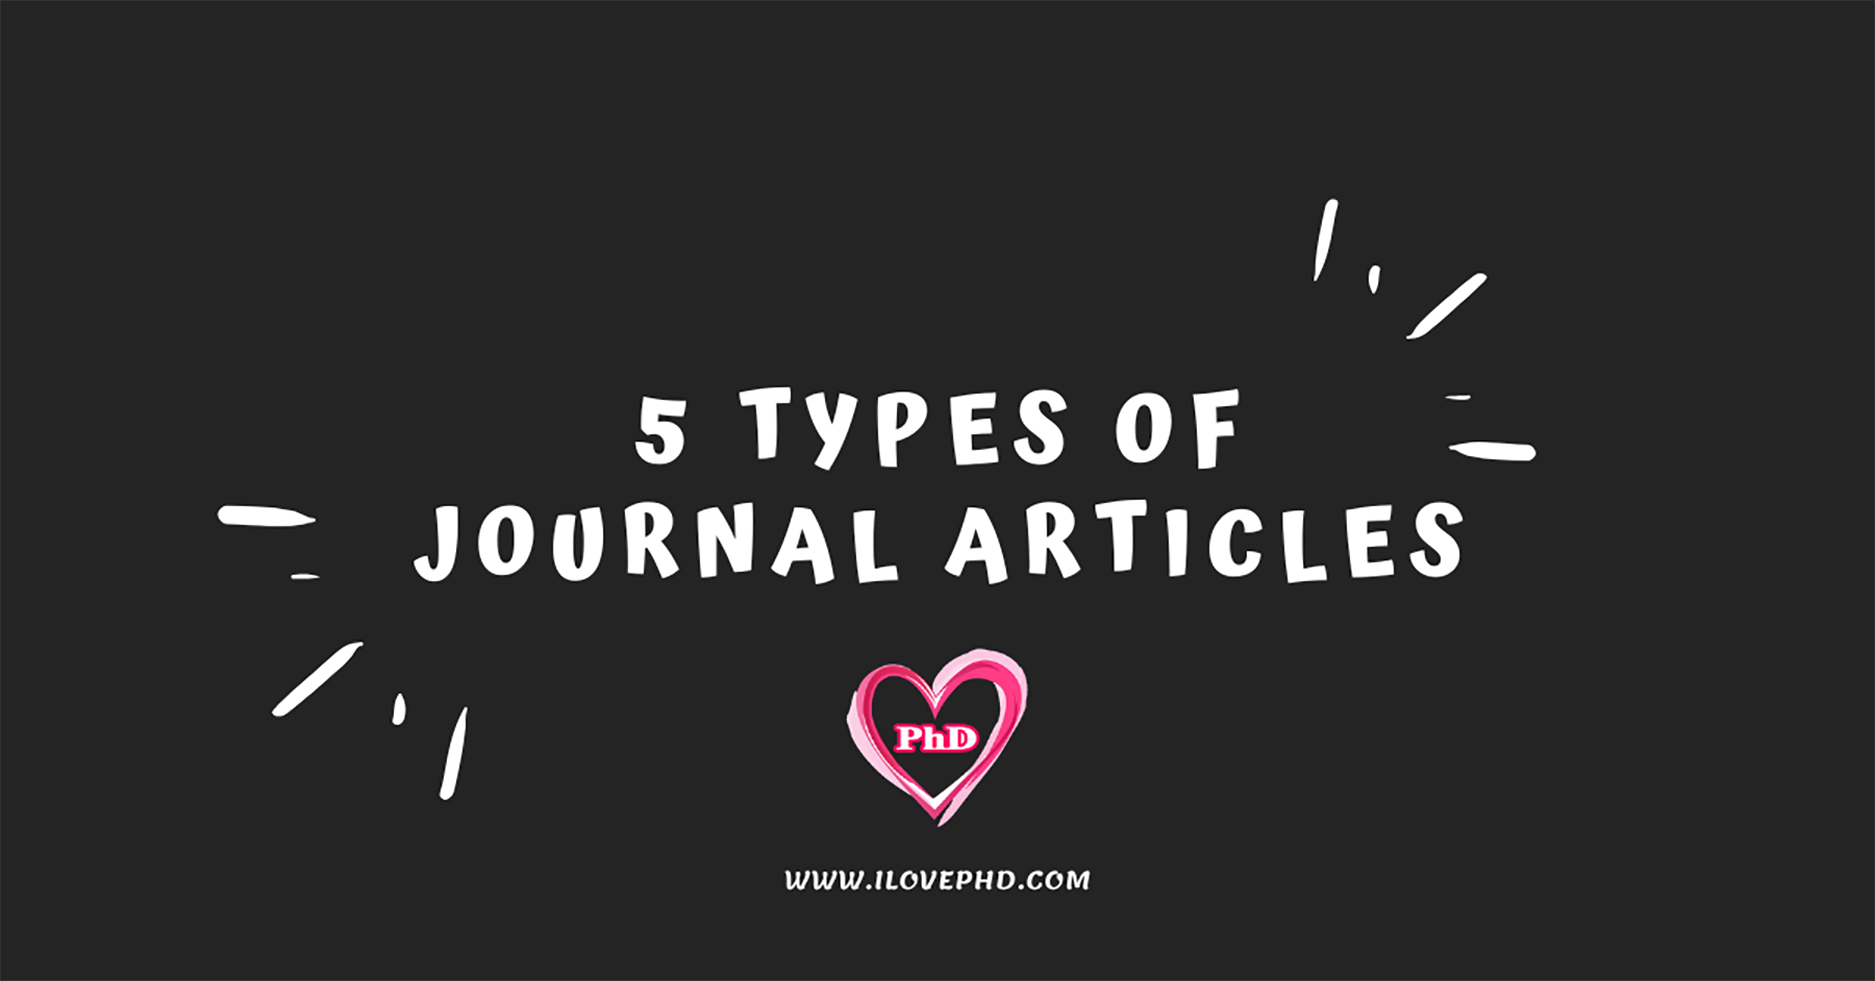 5 types of journal articles